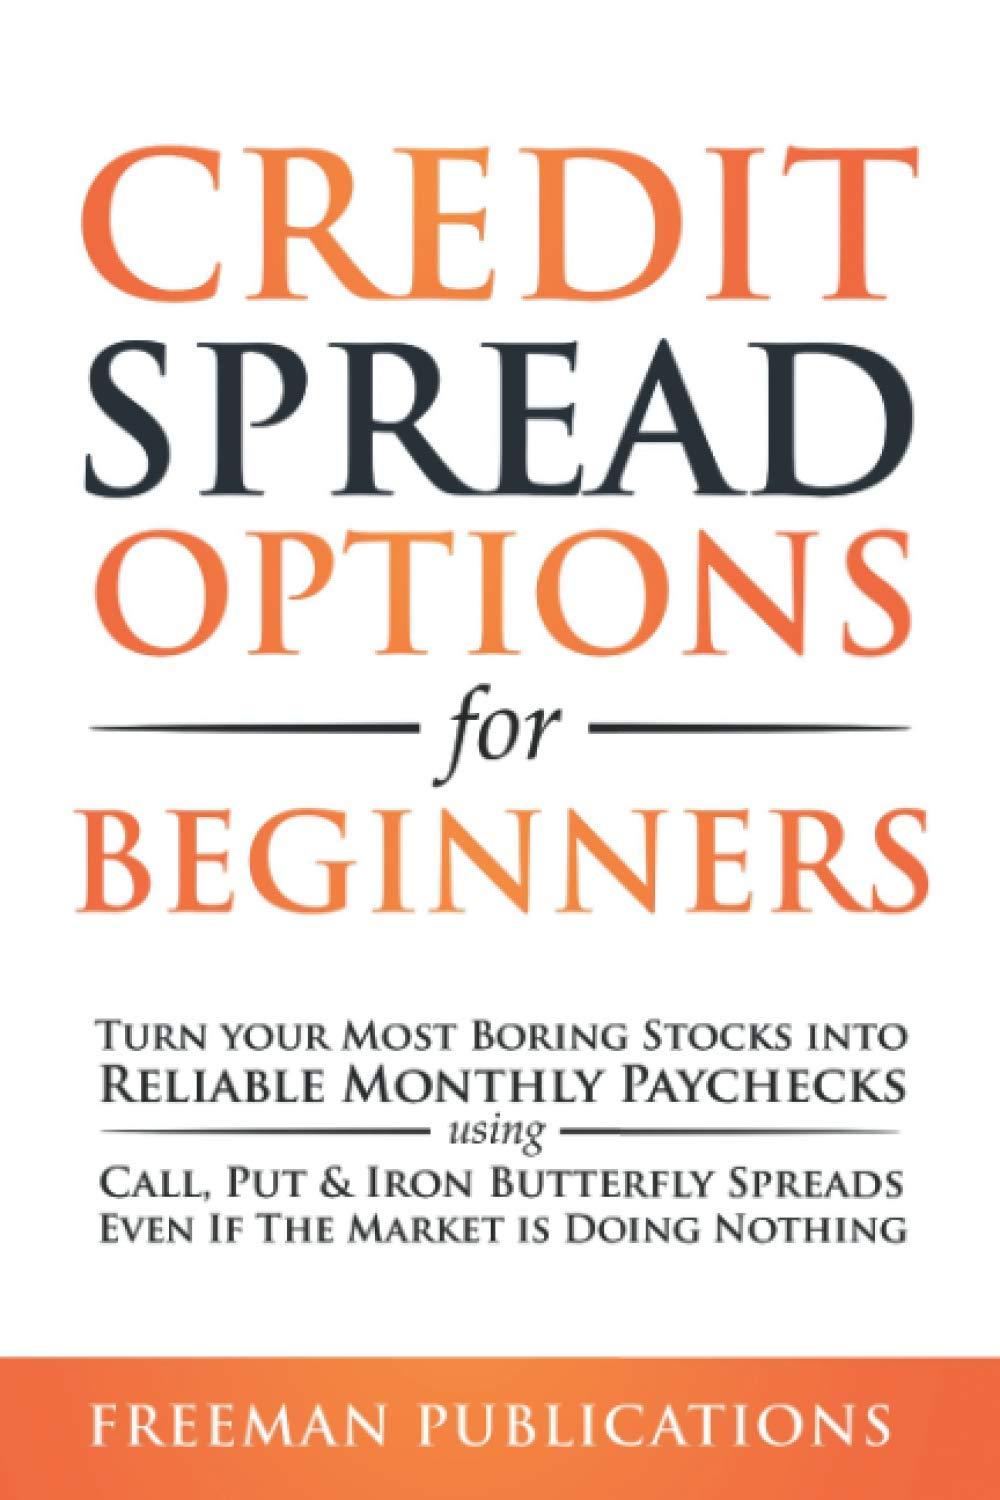 credit spread options for beginners turn your most boring stocks into reliable monthly paychecks using call